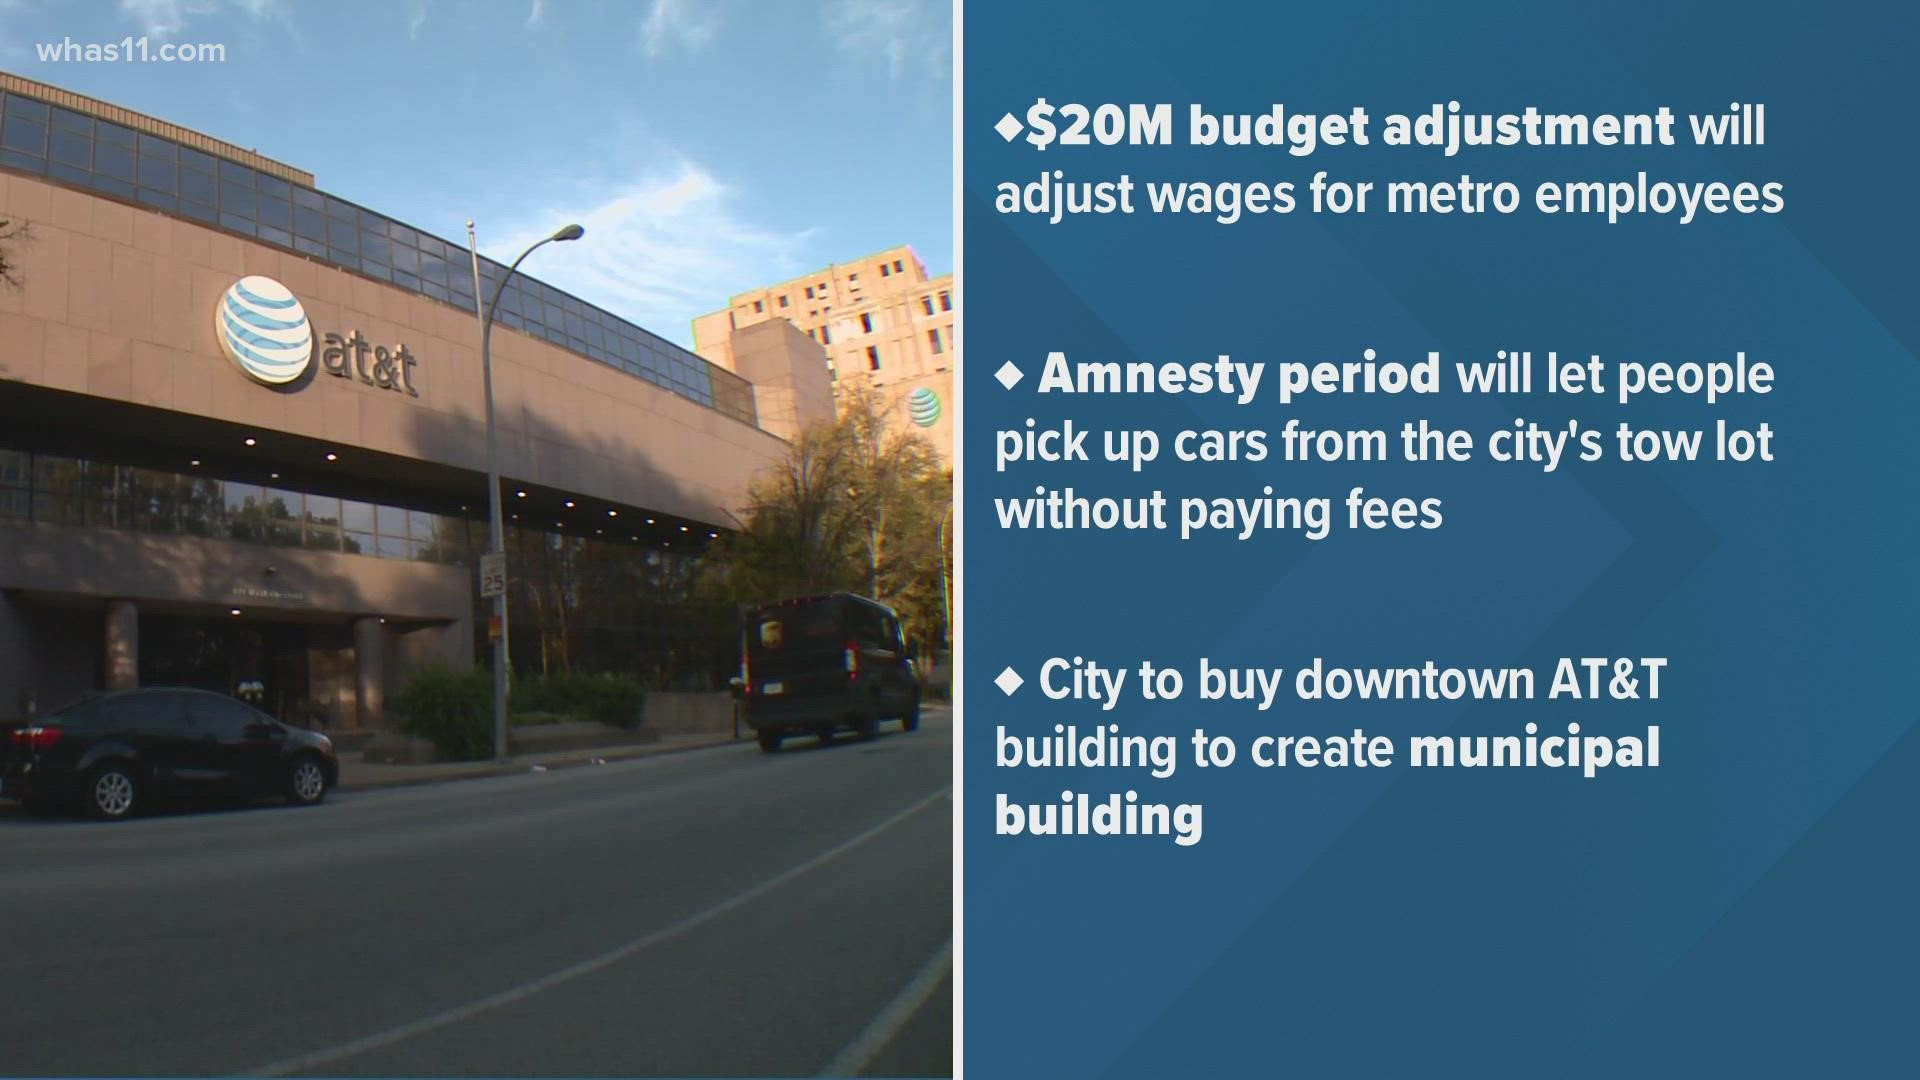 These decisions include budget adjustments for metro employees, an amnesty period for towed cars and a new municipal building at the old AT&T building.